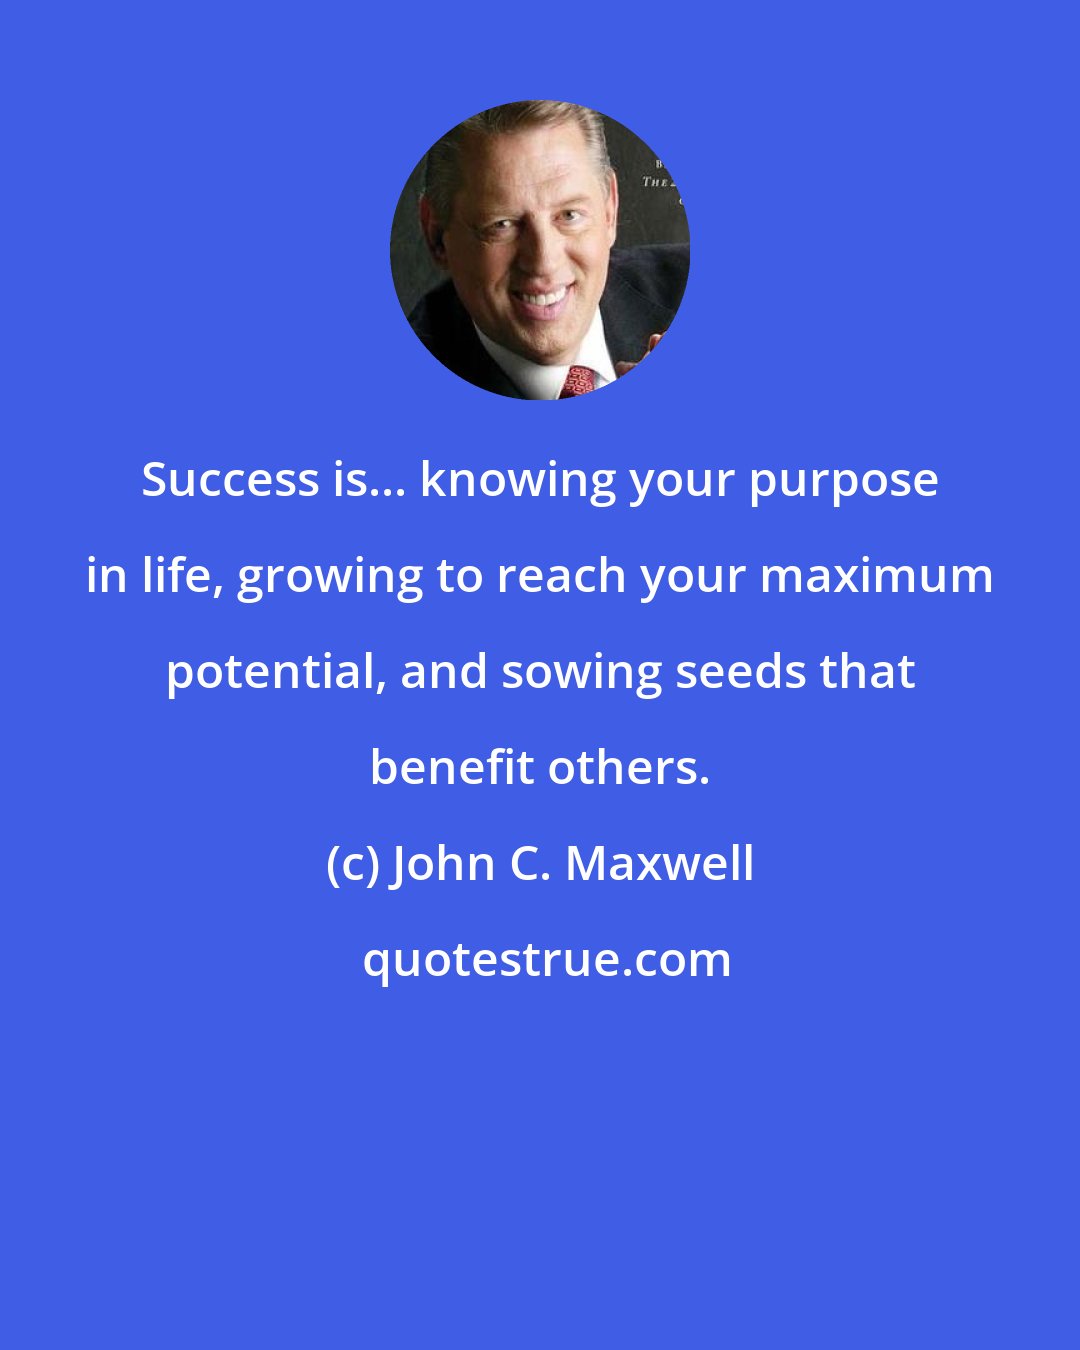 John C. Maxwell: Success is... knowing your purpose in life, growing to reach your maximum potential, and sowing seeds that benefit others.